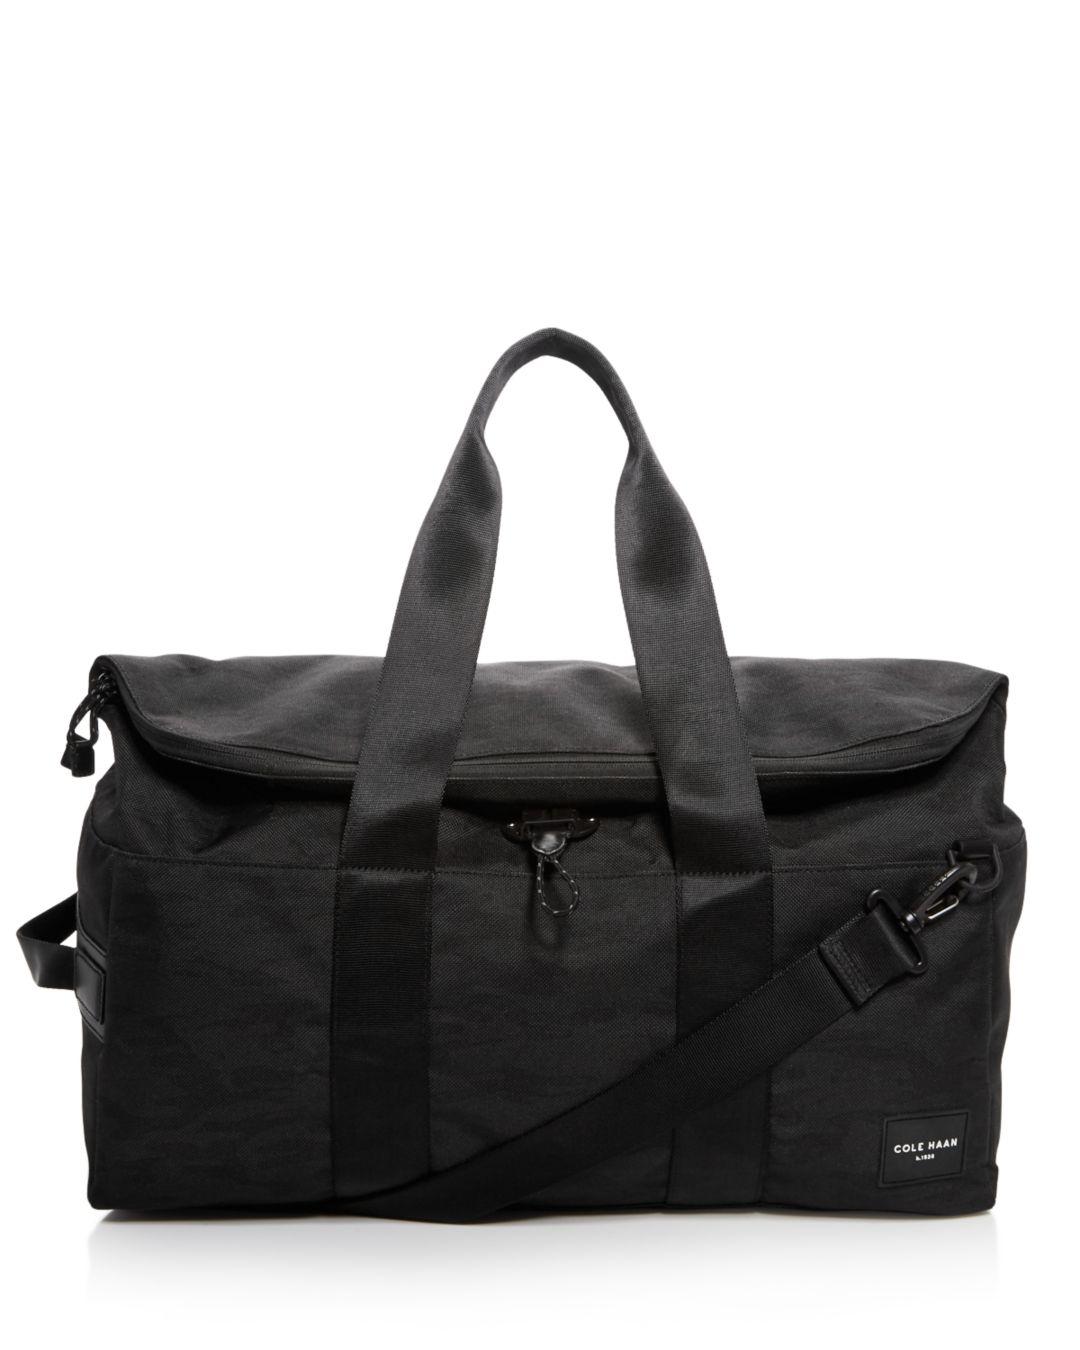 Cole Haan Synthetic Ballistic Nylon Duffle Bag in Black for Men - Lyst